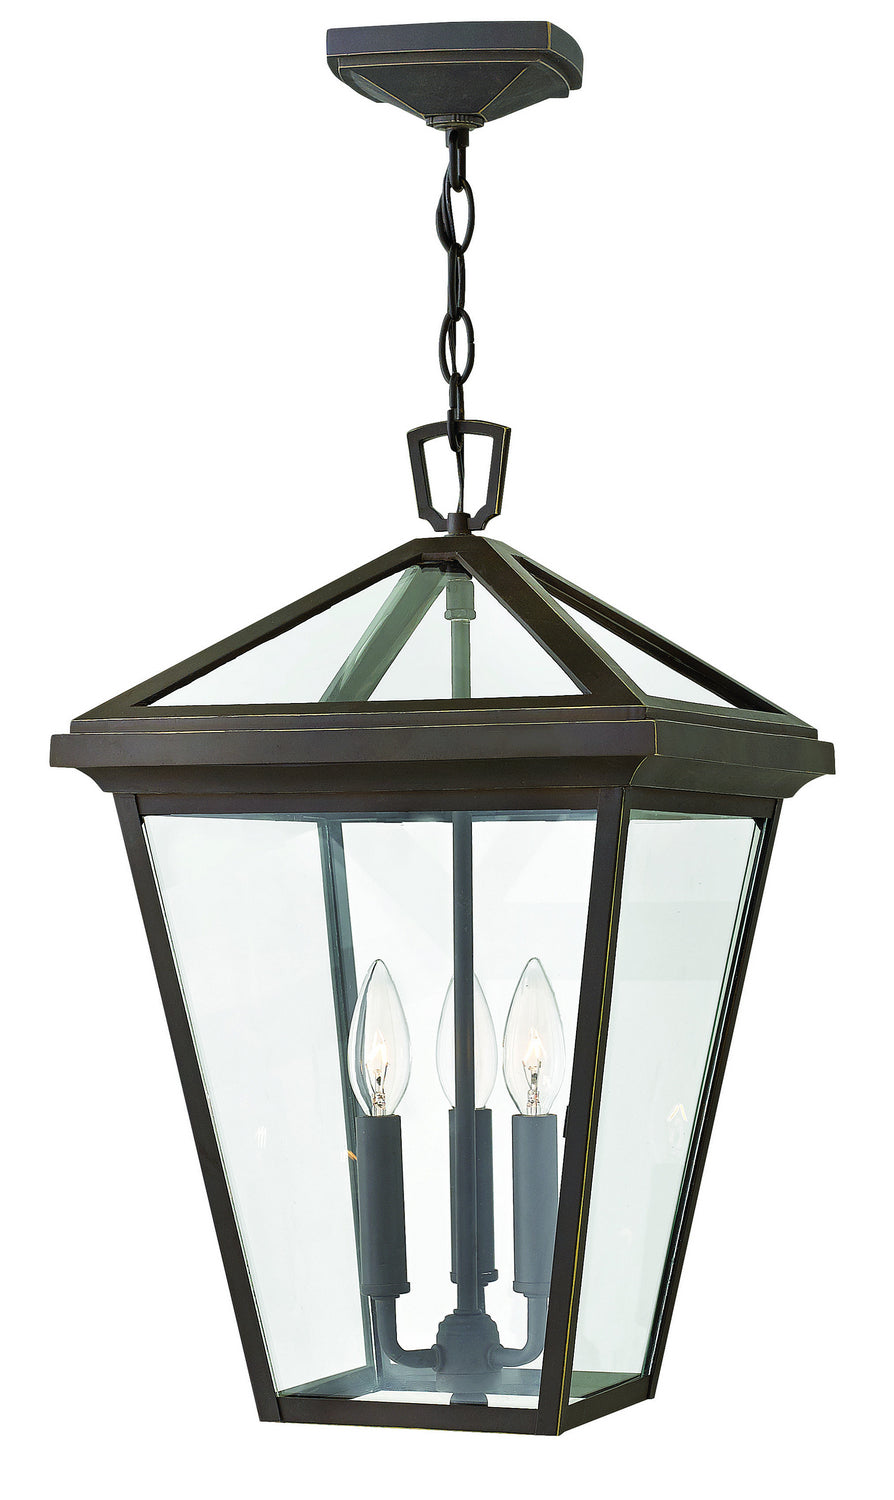 Hinkley - 2562OZ - LED Hanging Lantern - Alford Place - Oil Rubbed Bronze